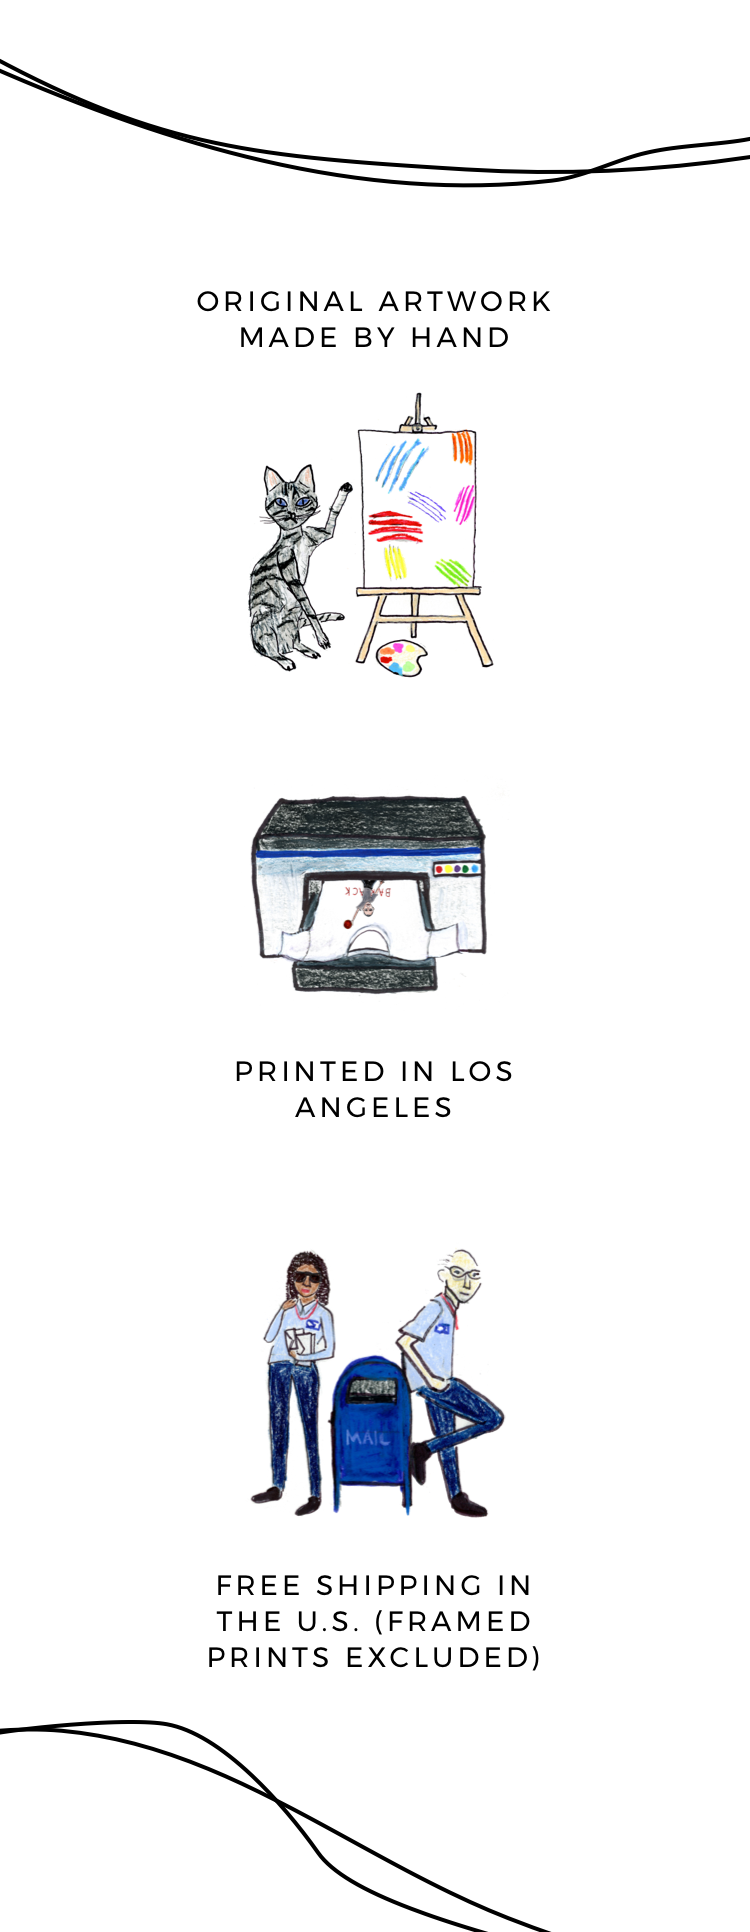 Original artwork made by hand, printed in LA, with free shipping in the US